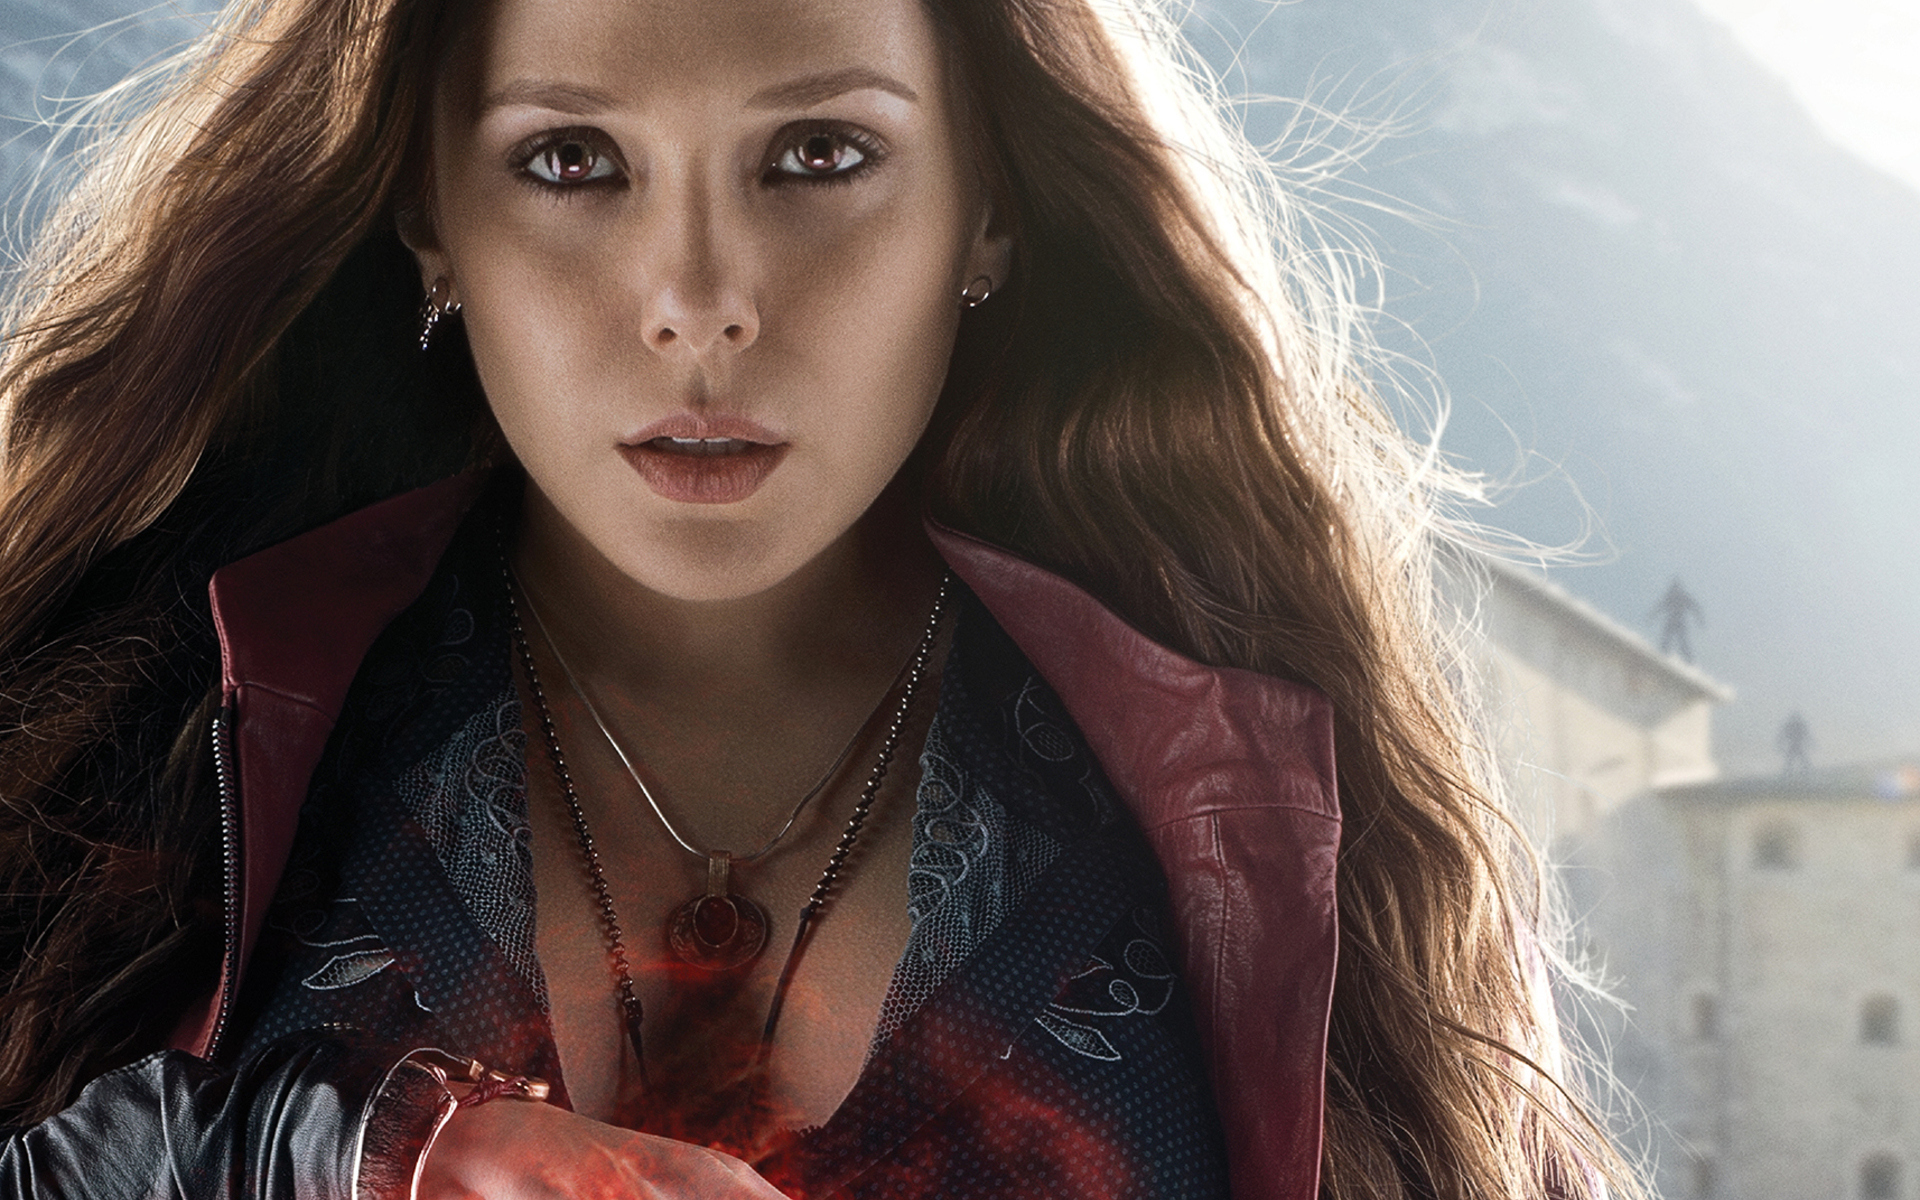 earrings, avengers, elizabeth olsen, long hair, magic, movie, avengers: age of ultron, necklace, red eyes, redhead, scarlet witch, the avengers